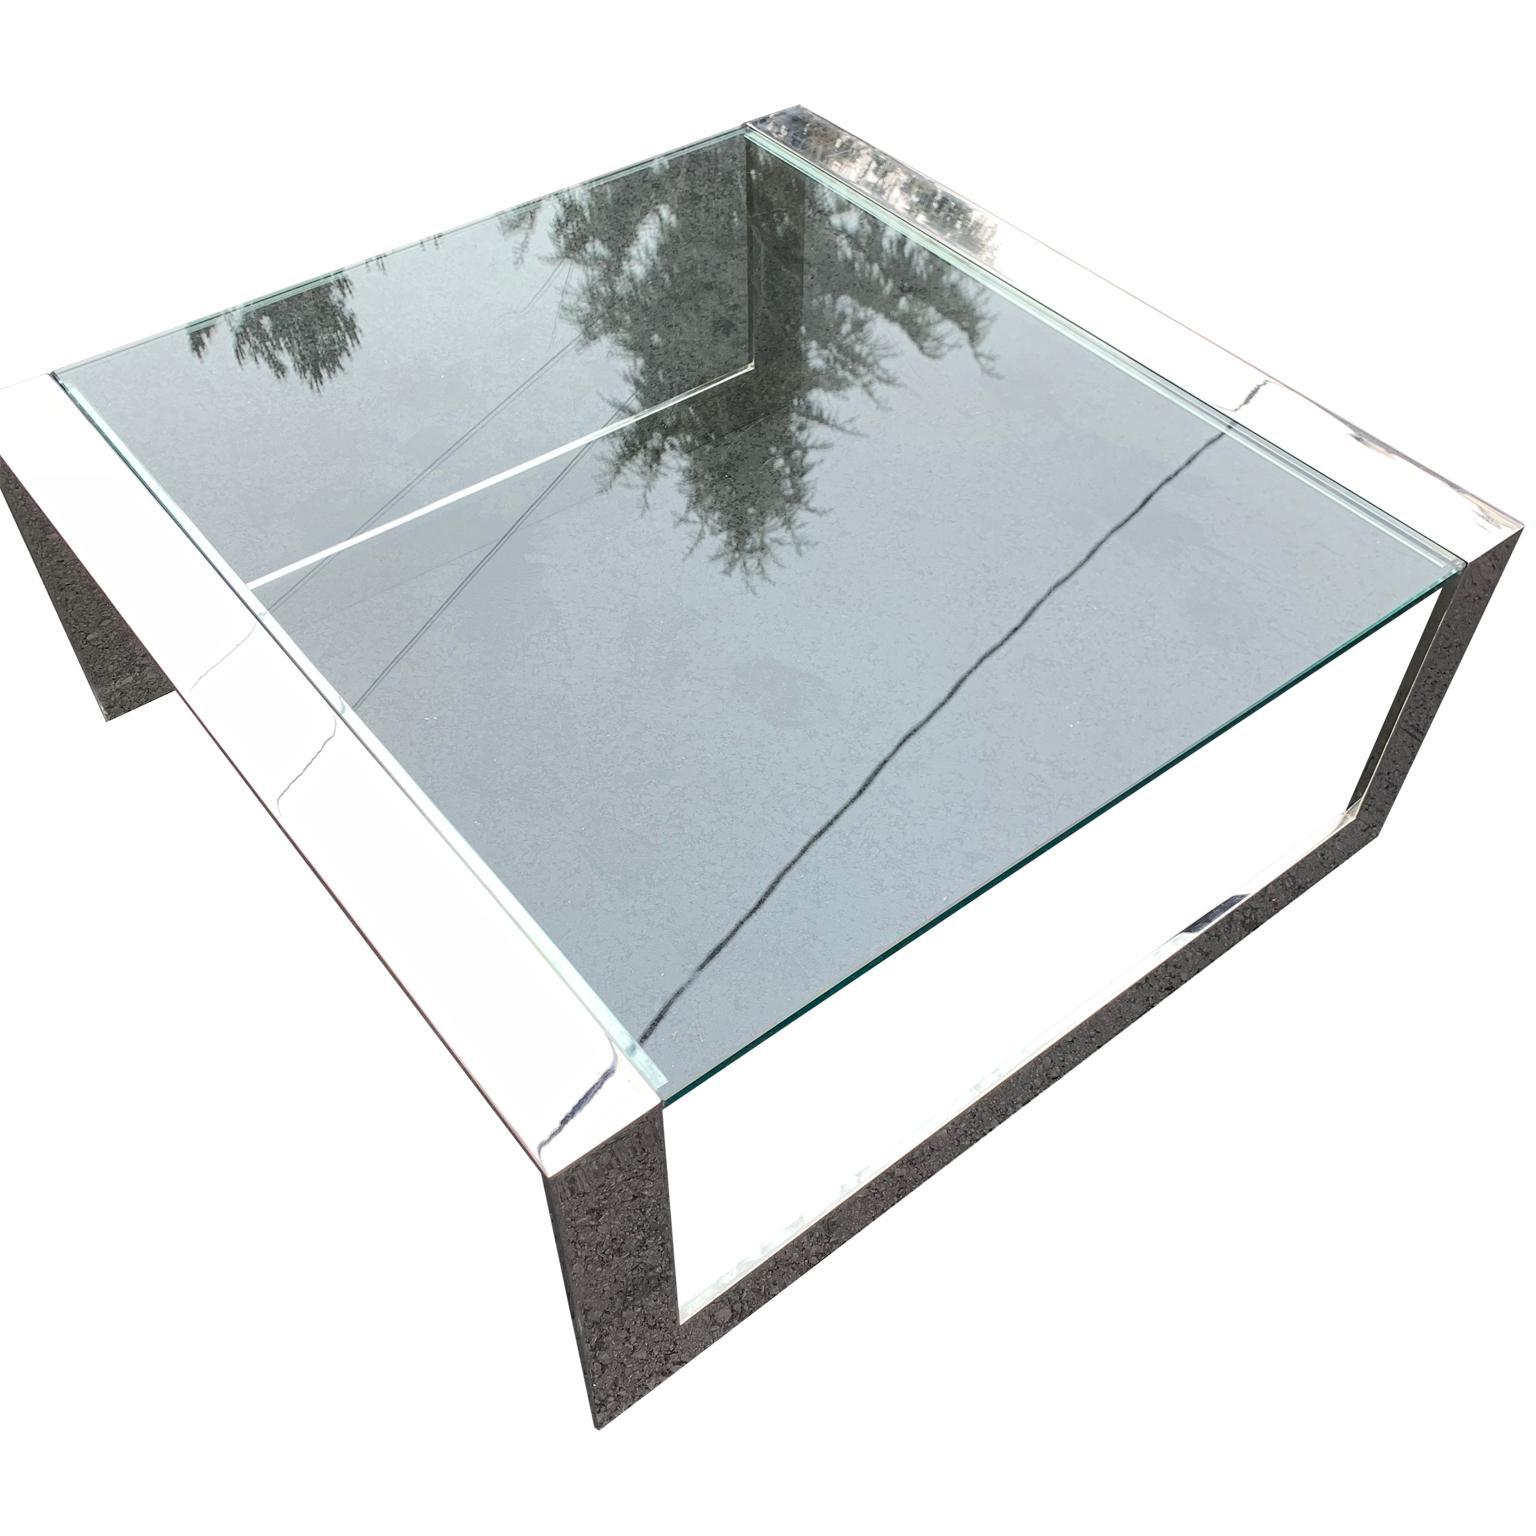 Square Mid-Century Modern Italian Glass Top Chromed Steel Cocktail Table For Sale 3